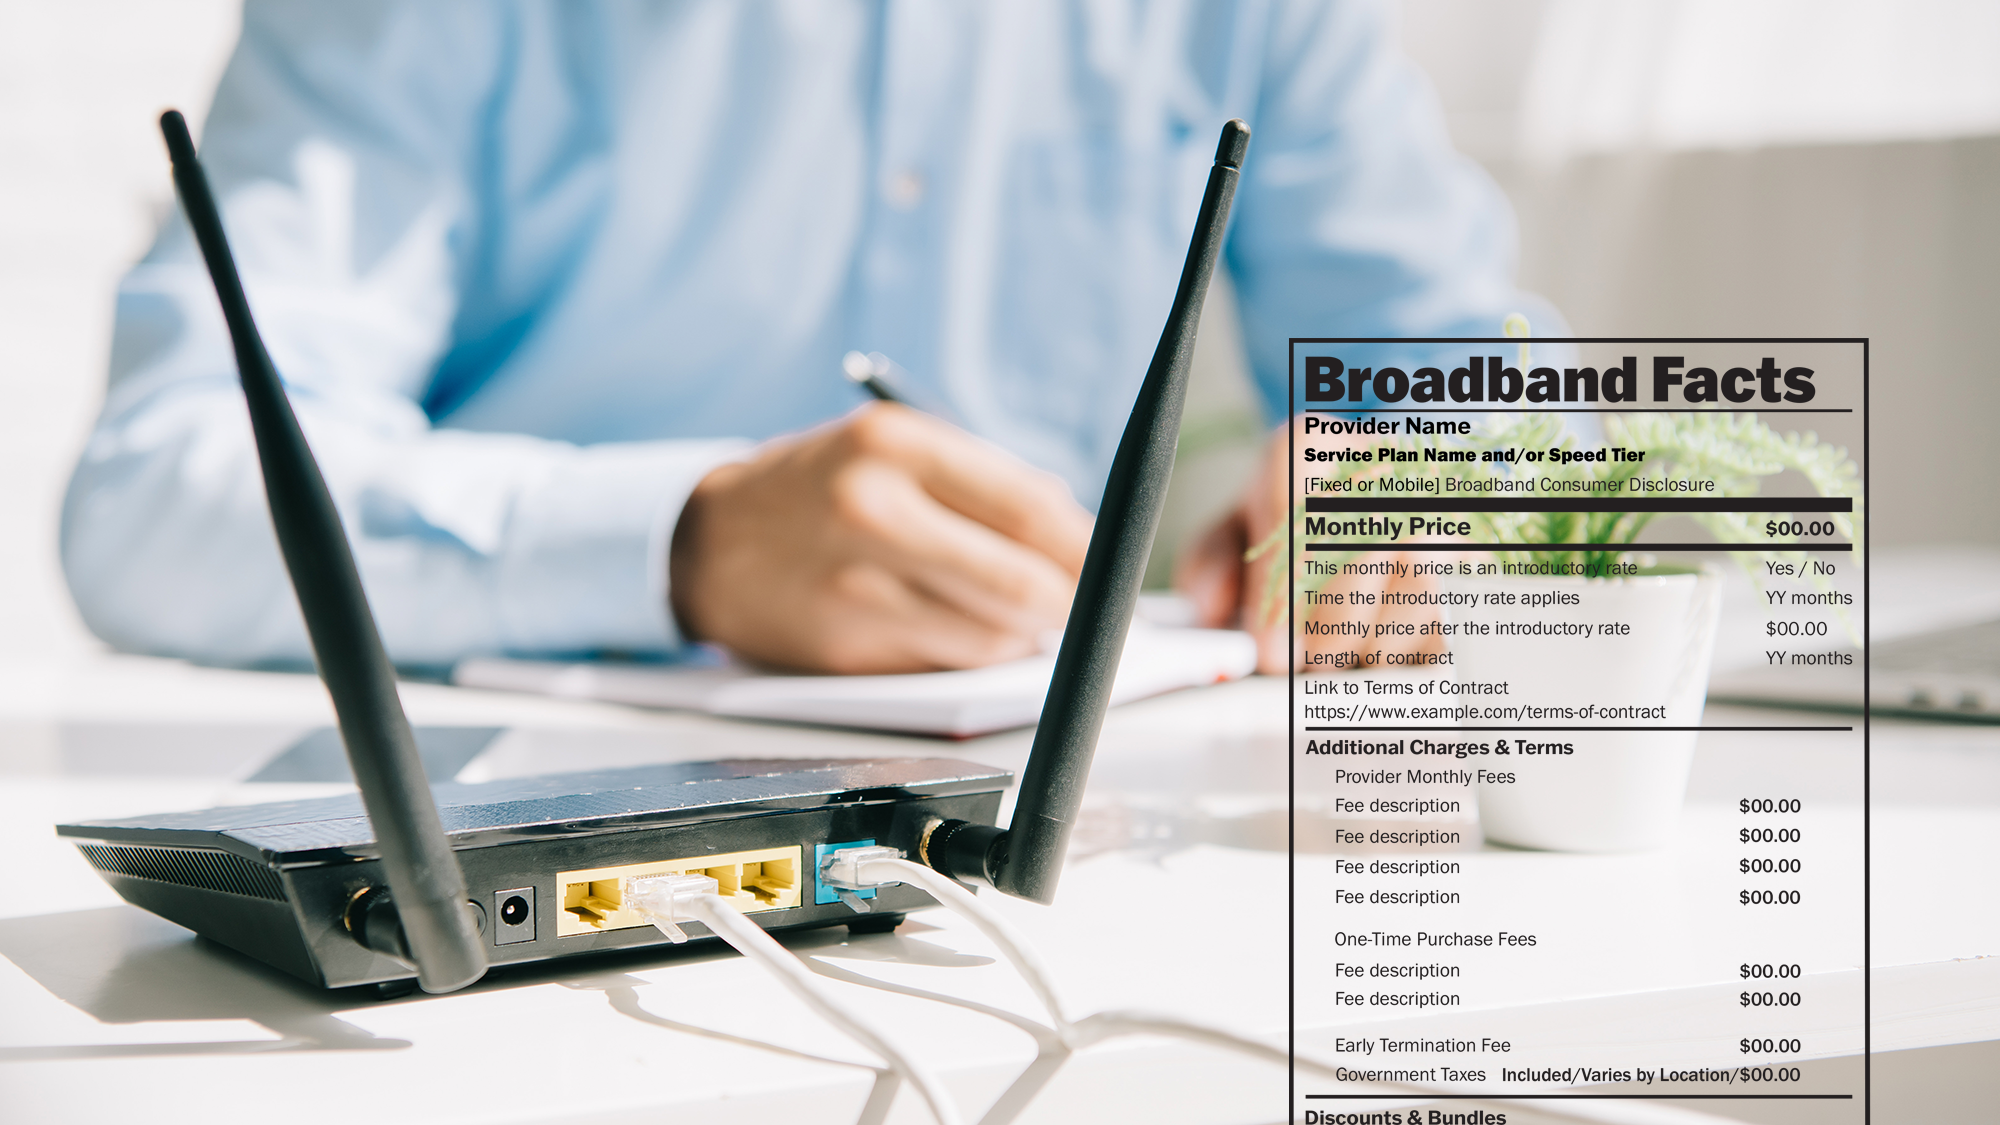 New broadband nutrition labels will force internet providers to disclose when they add router fees and other additional charges to monthly broadband bills.